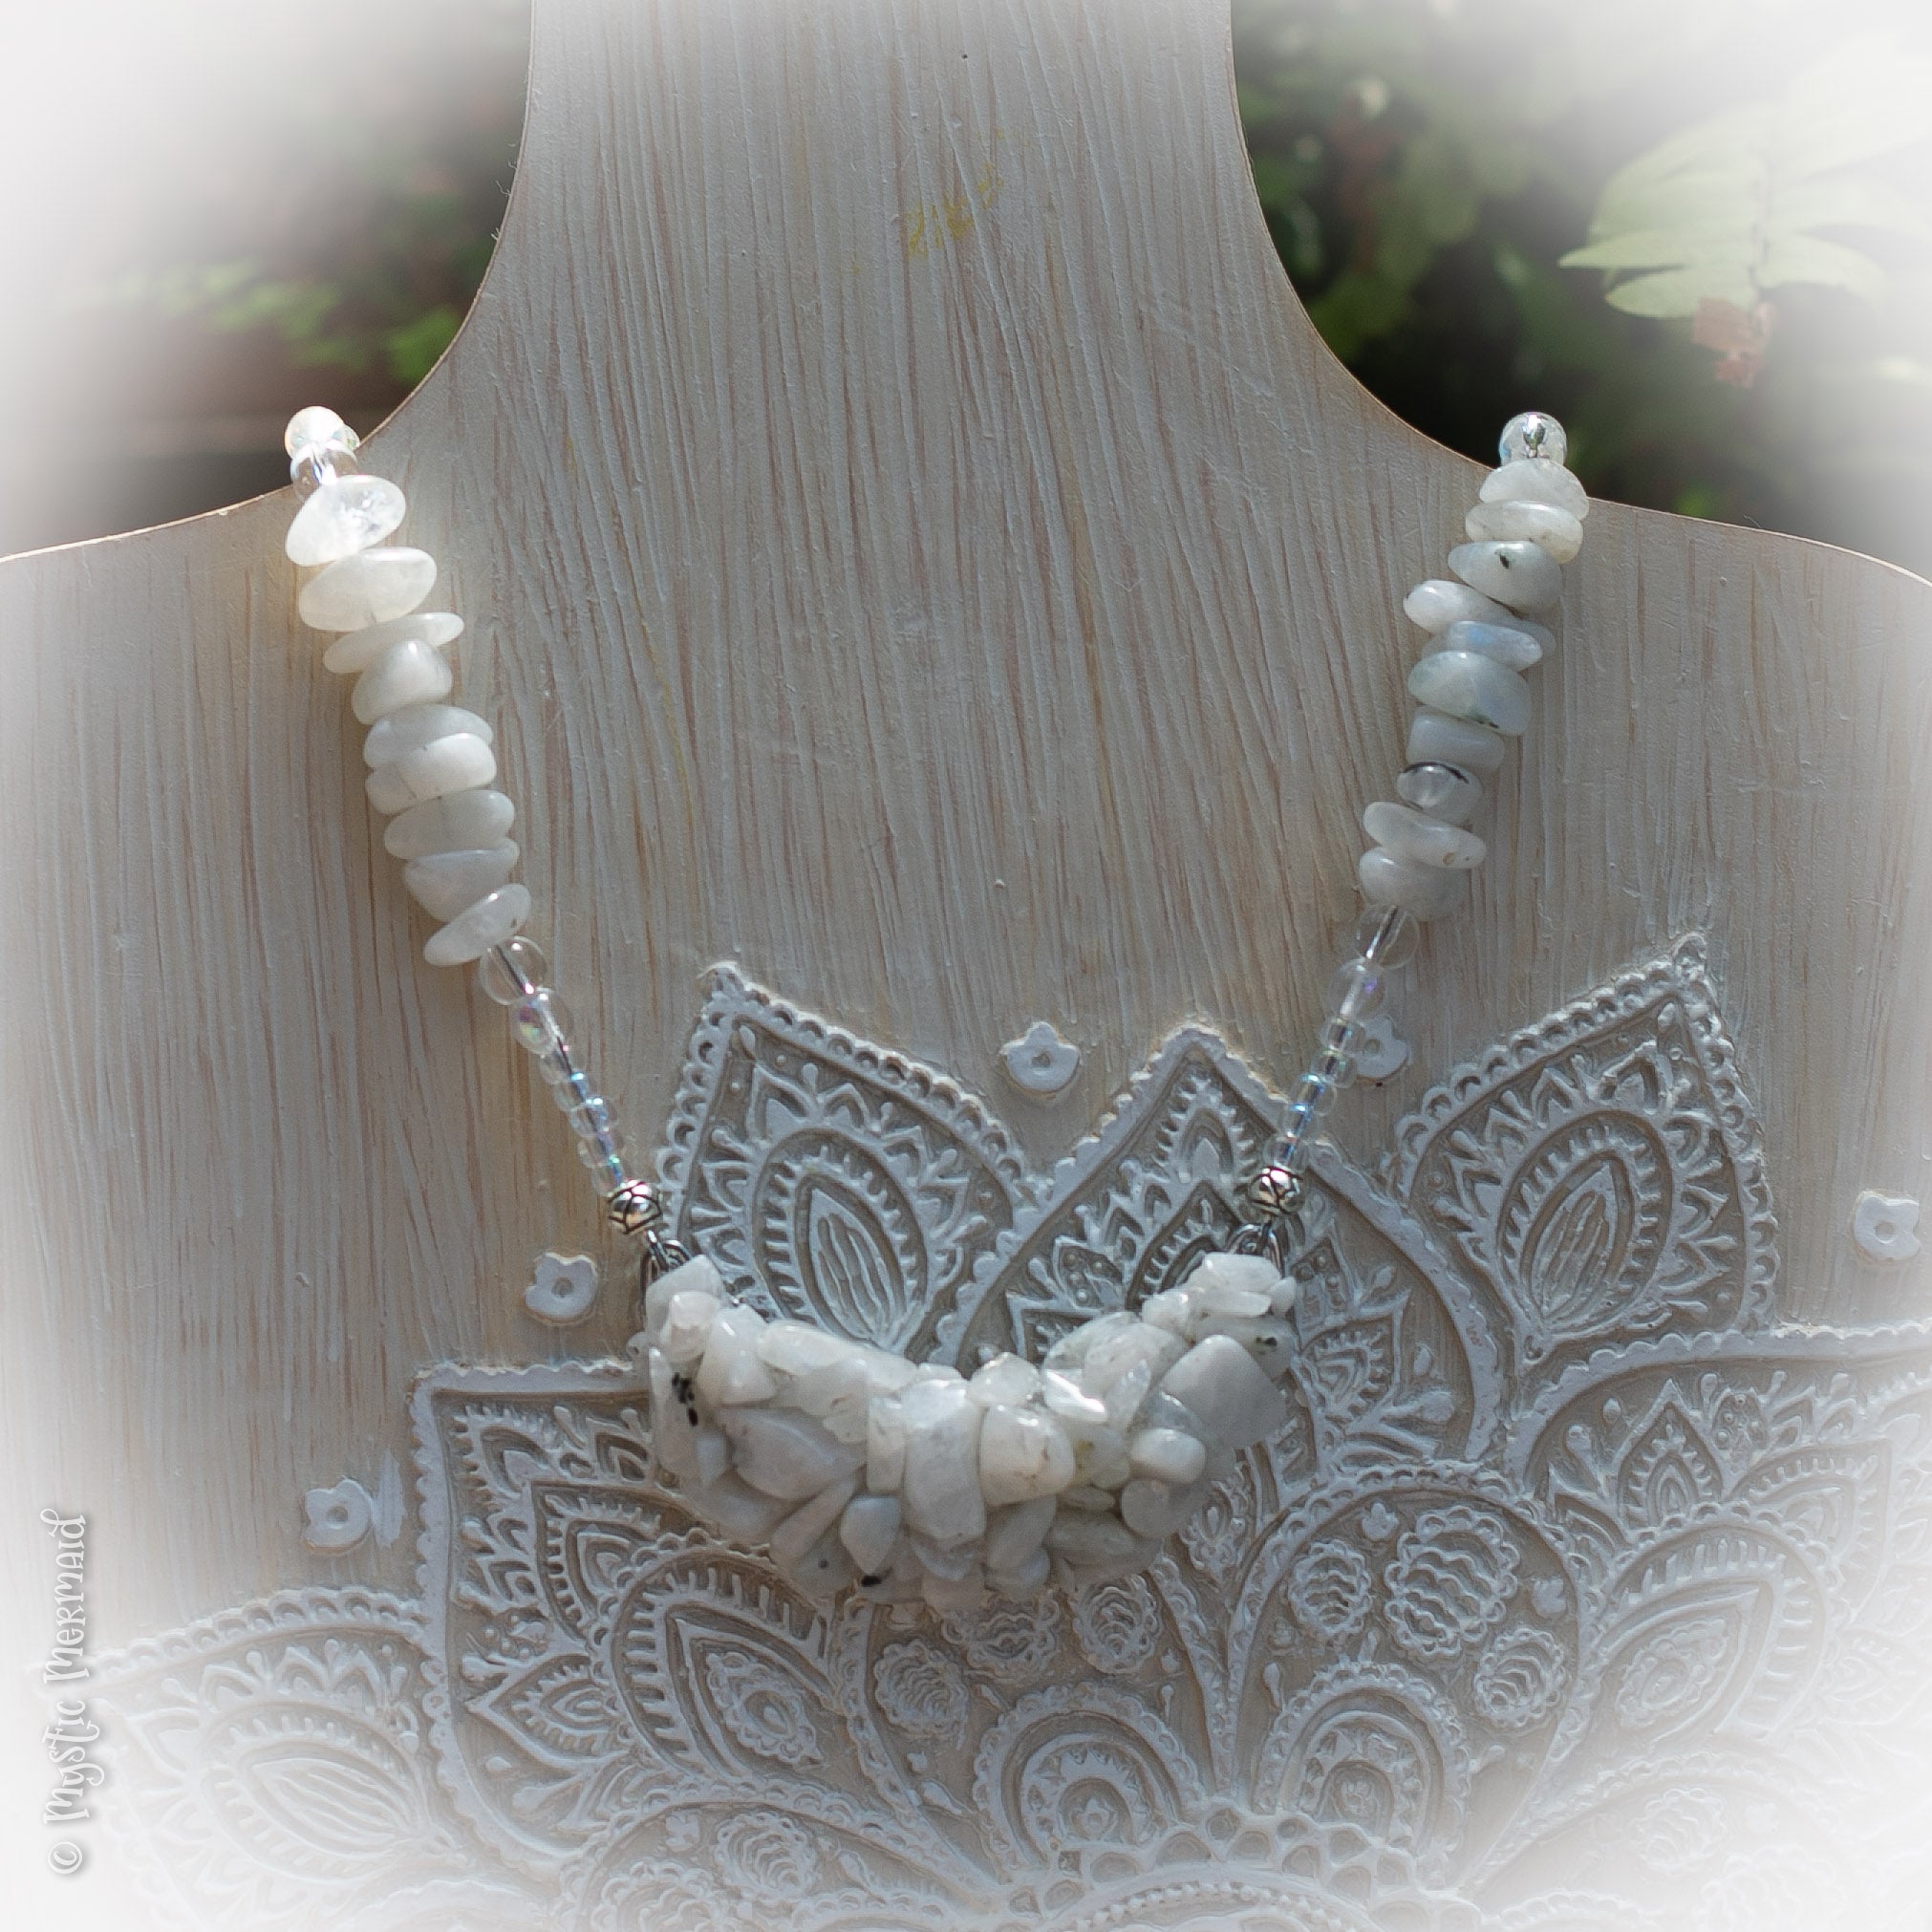 Rainbow Moonstone Crescent Moon Pendant Feature Necklace with Angel Aura and Clear Quartz